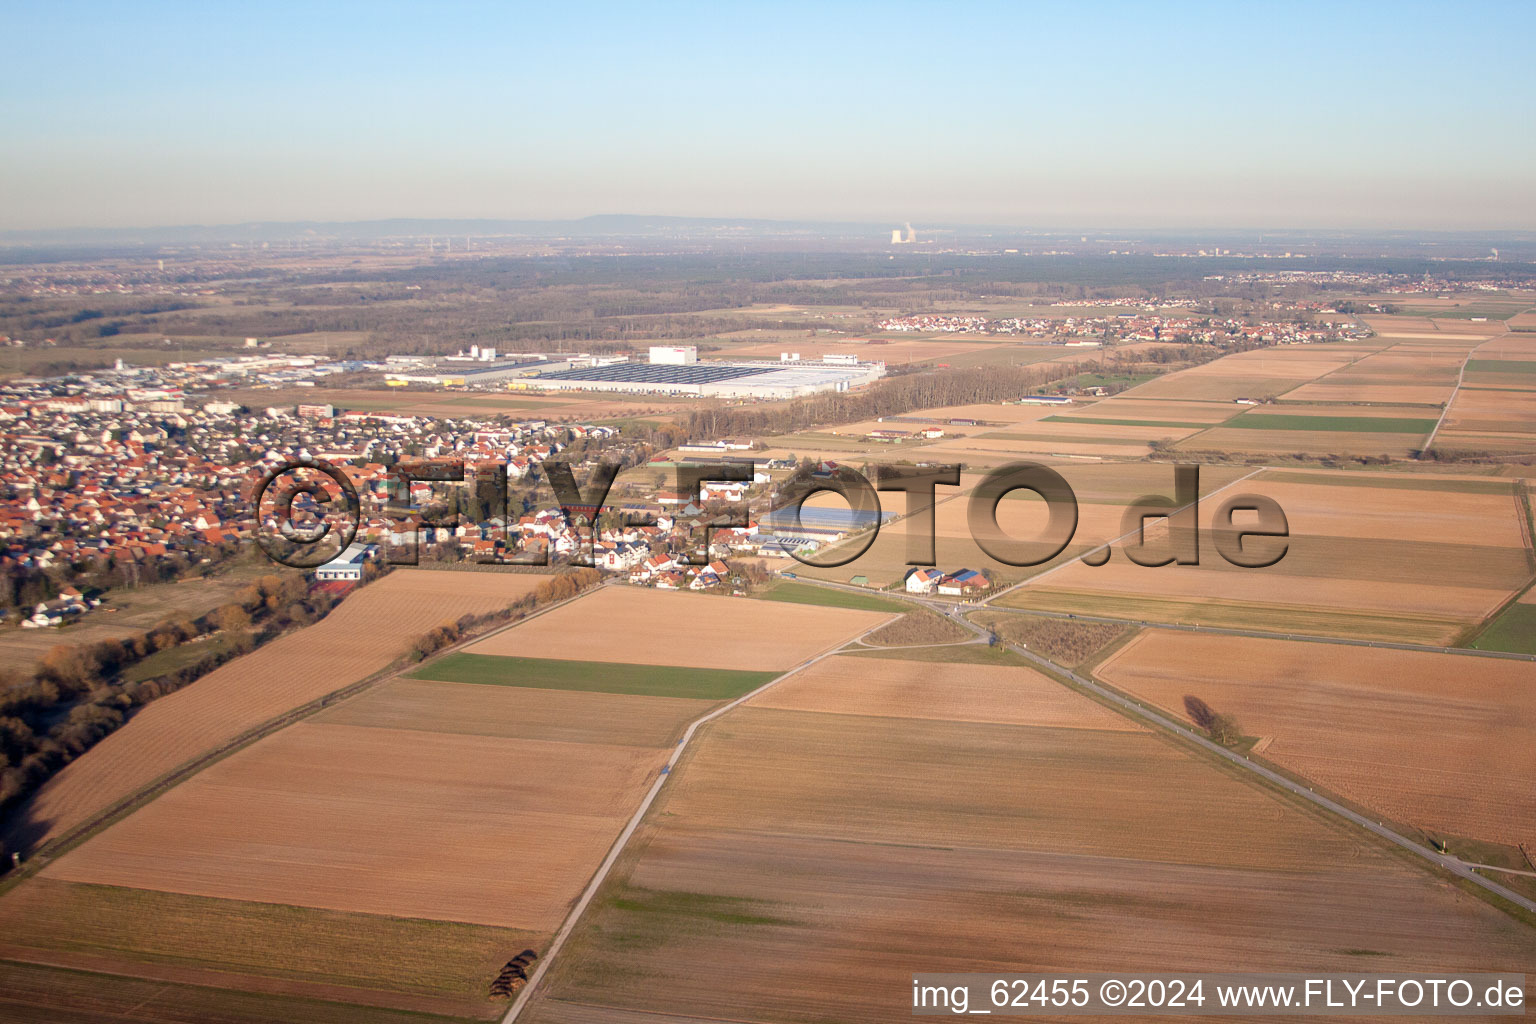 Offenbach an der Queich in the state Rhineland-Palatinate, Germany seen from a drone